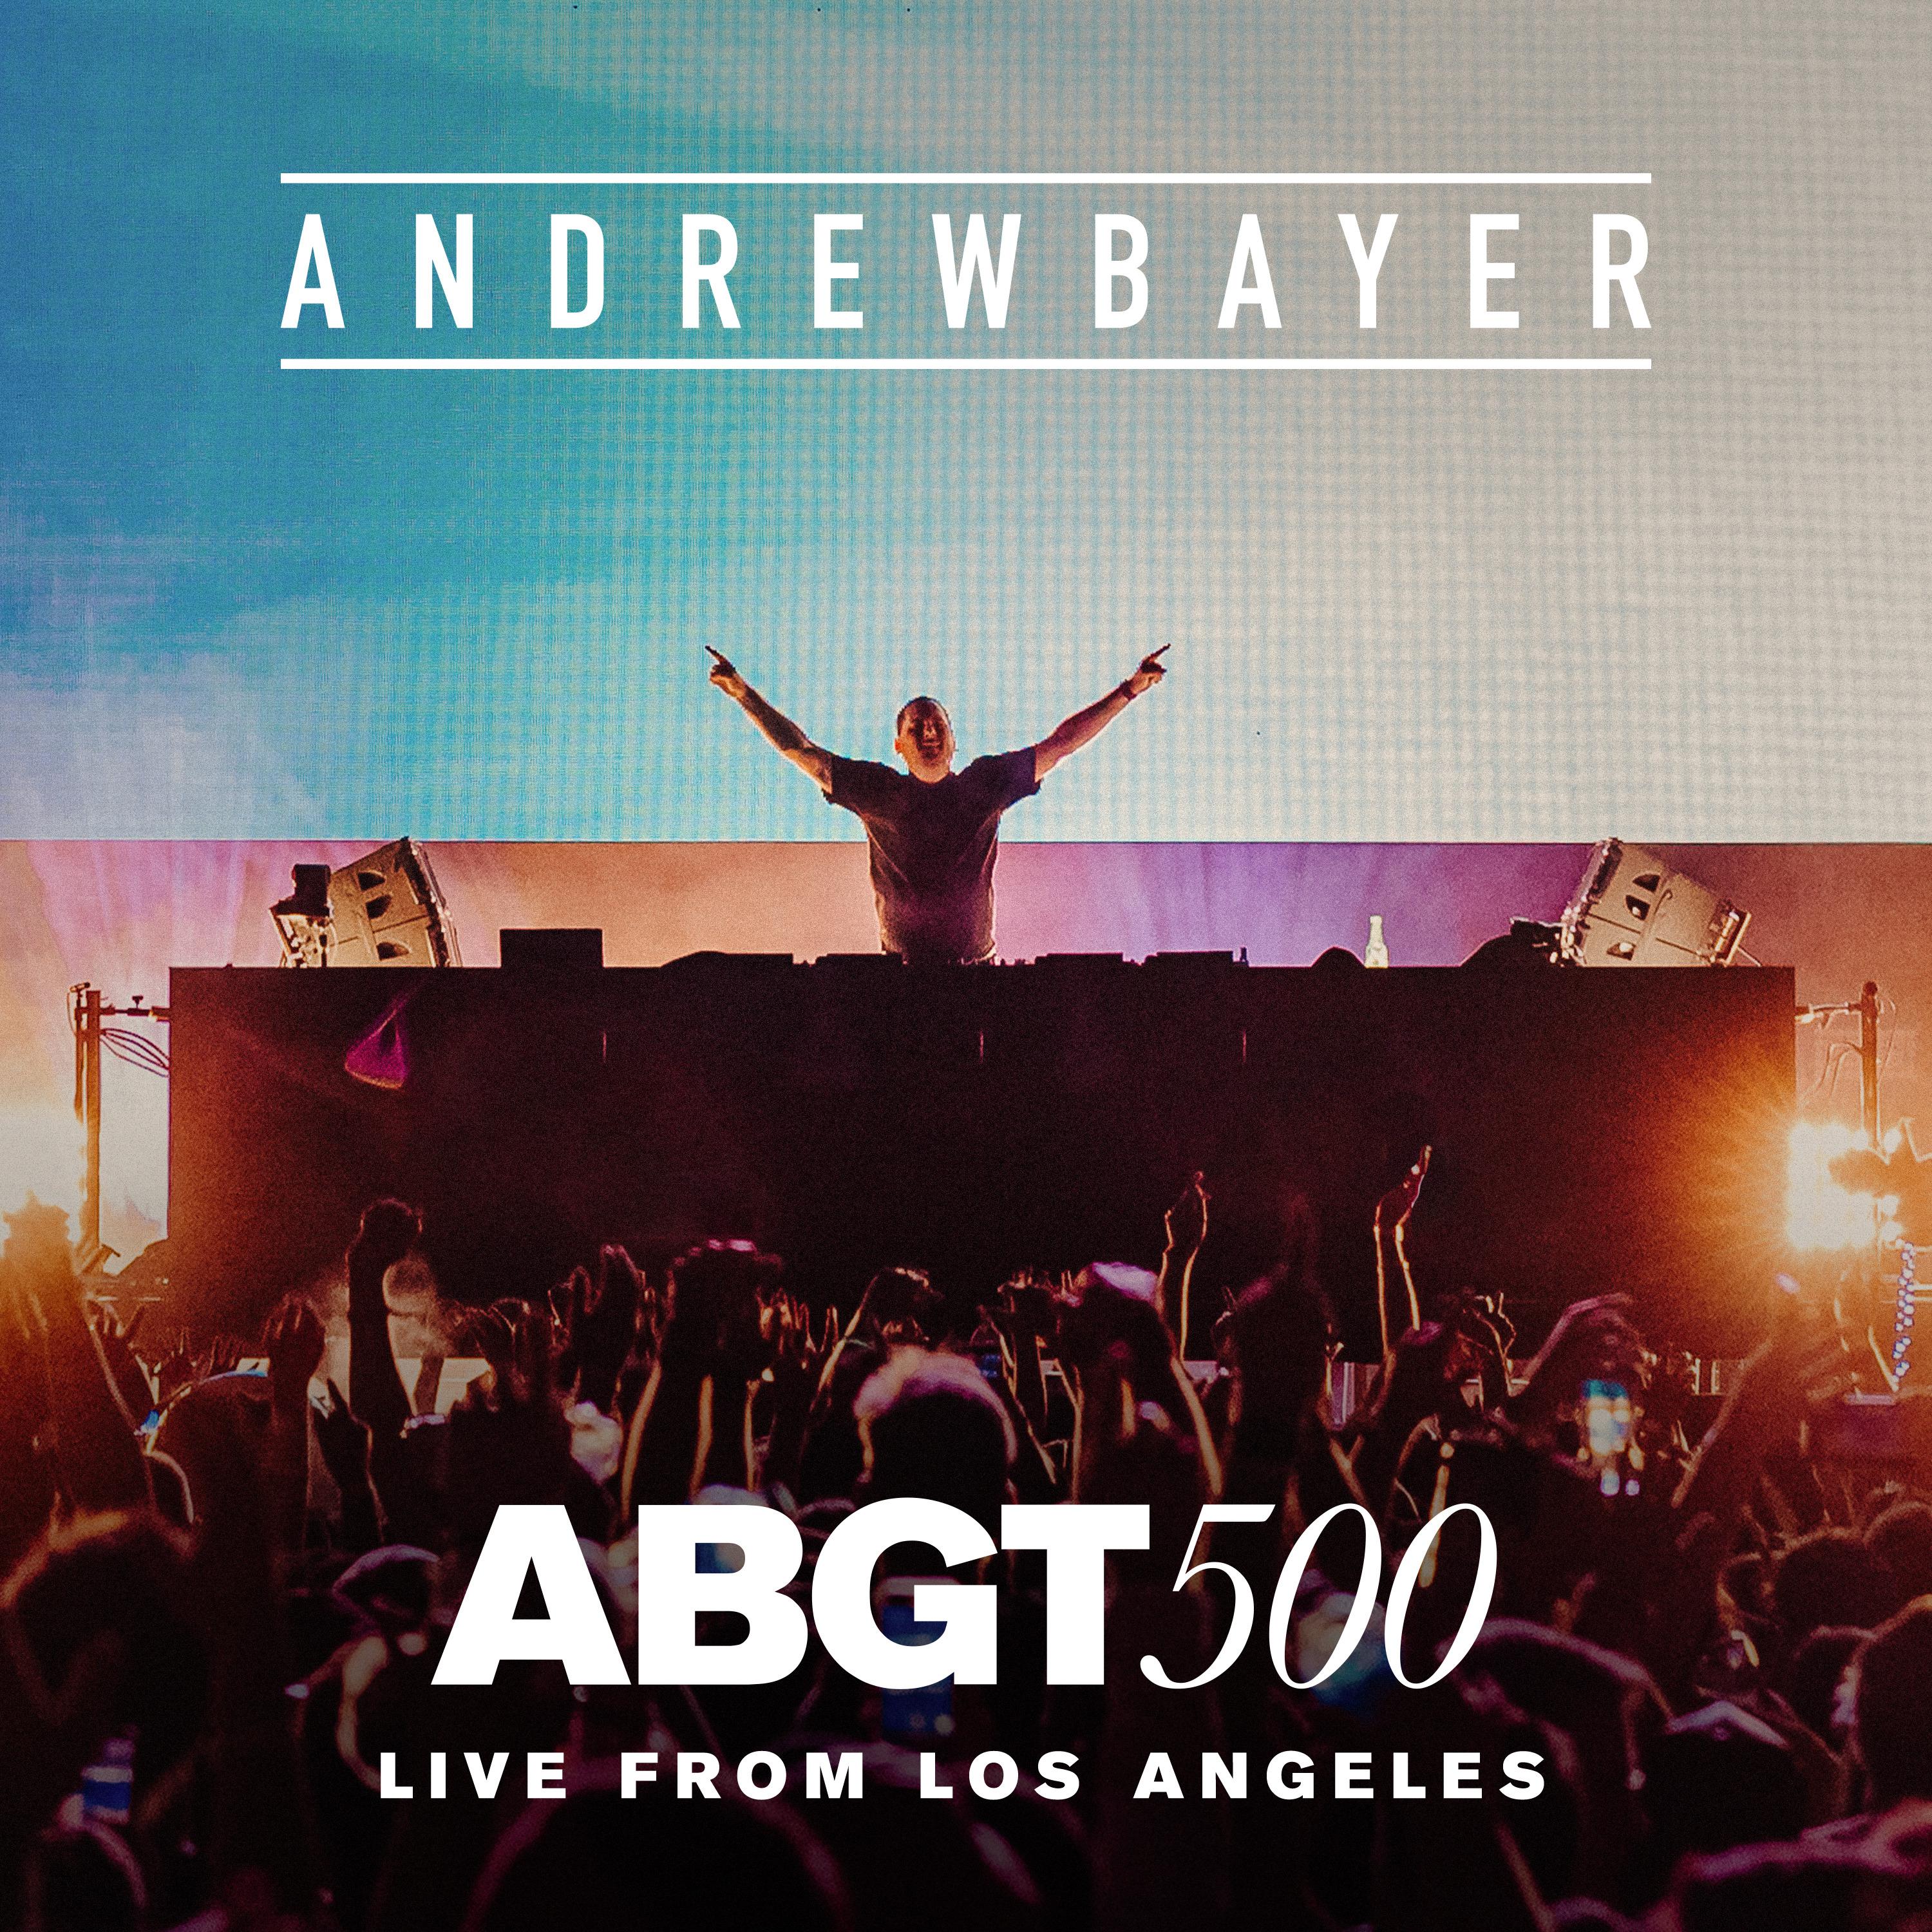 Andrew Bayer - Break The Rules (Live From ABGT500, Banc Of California Stadium, L.A.)